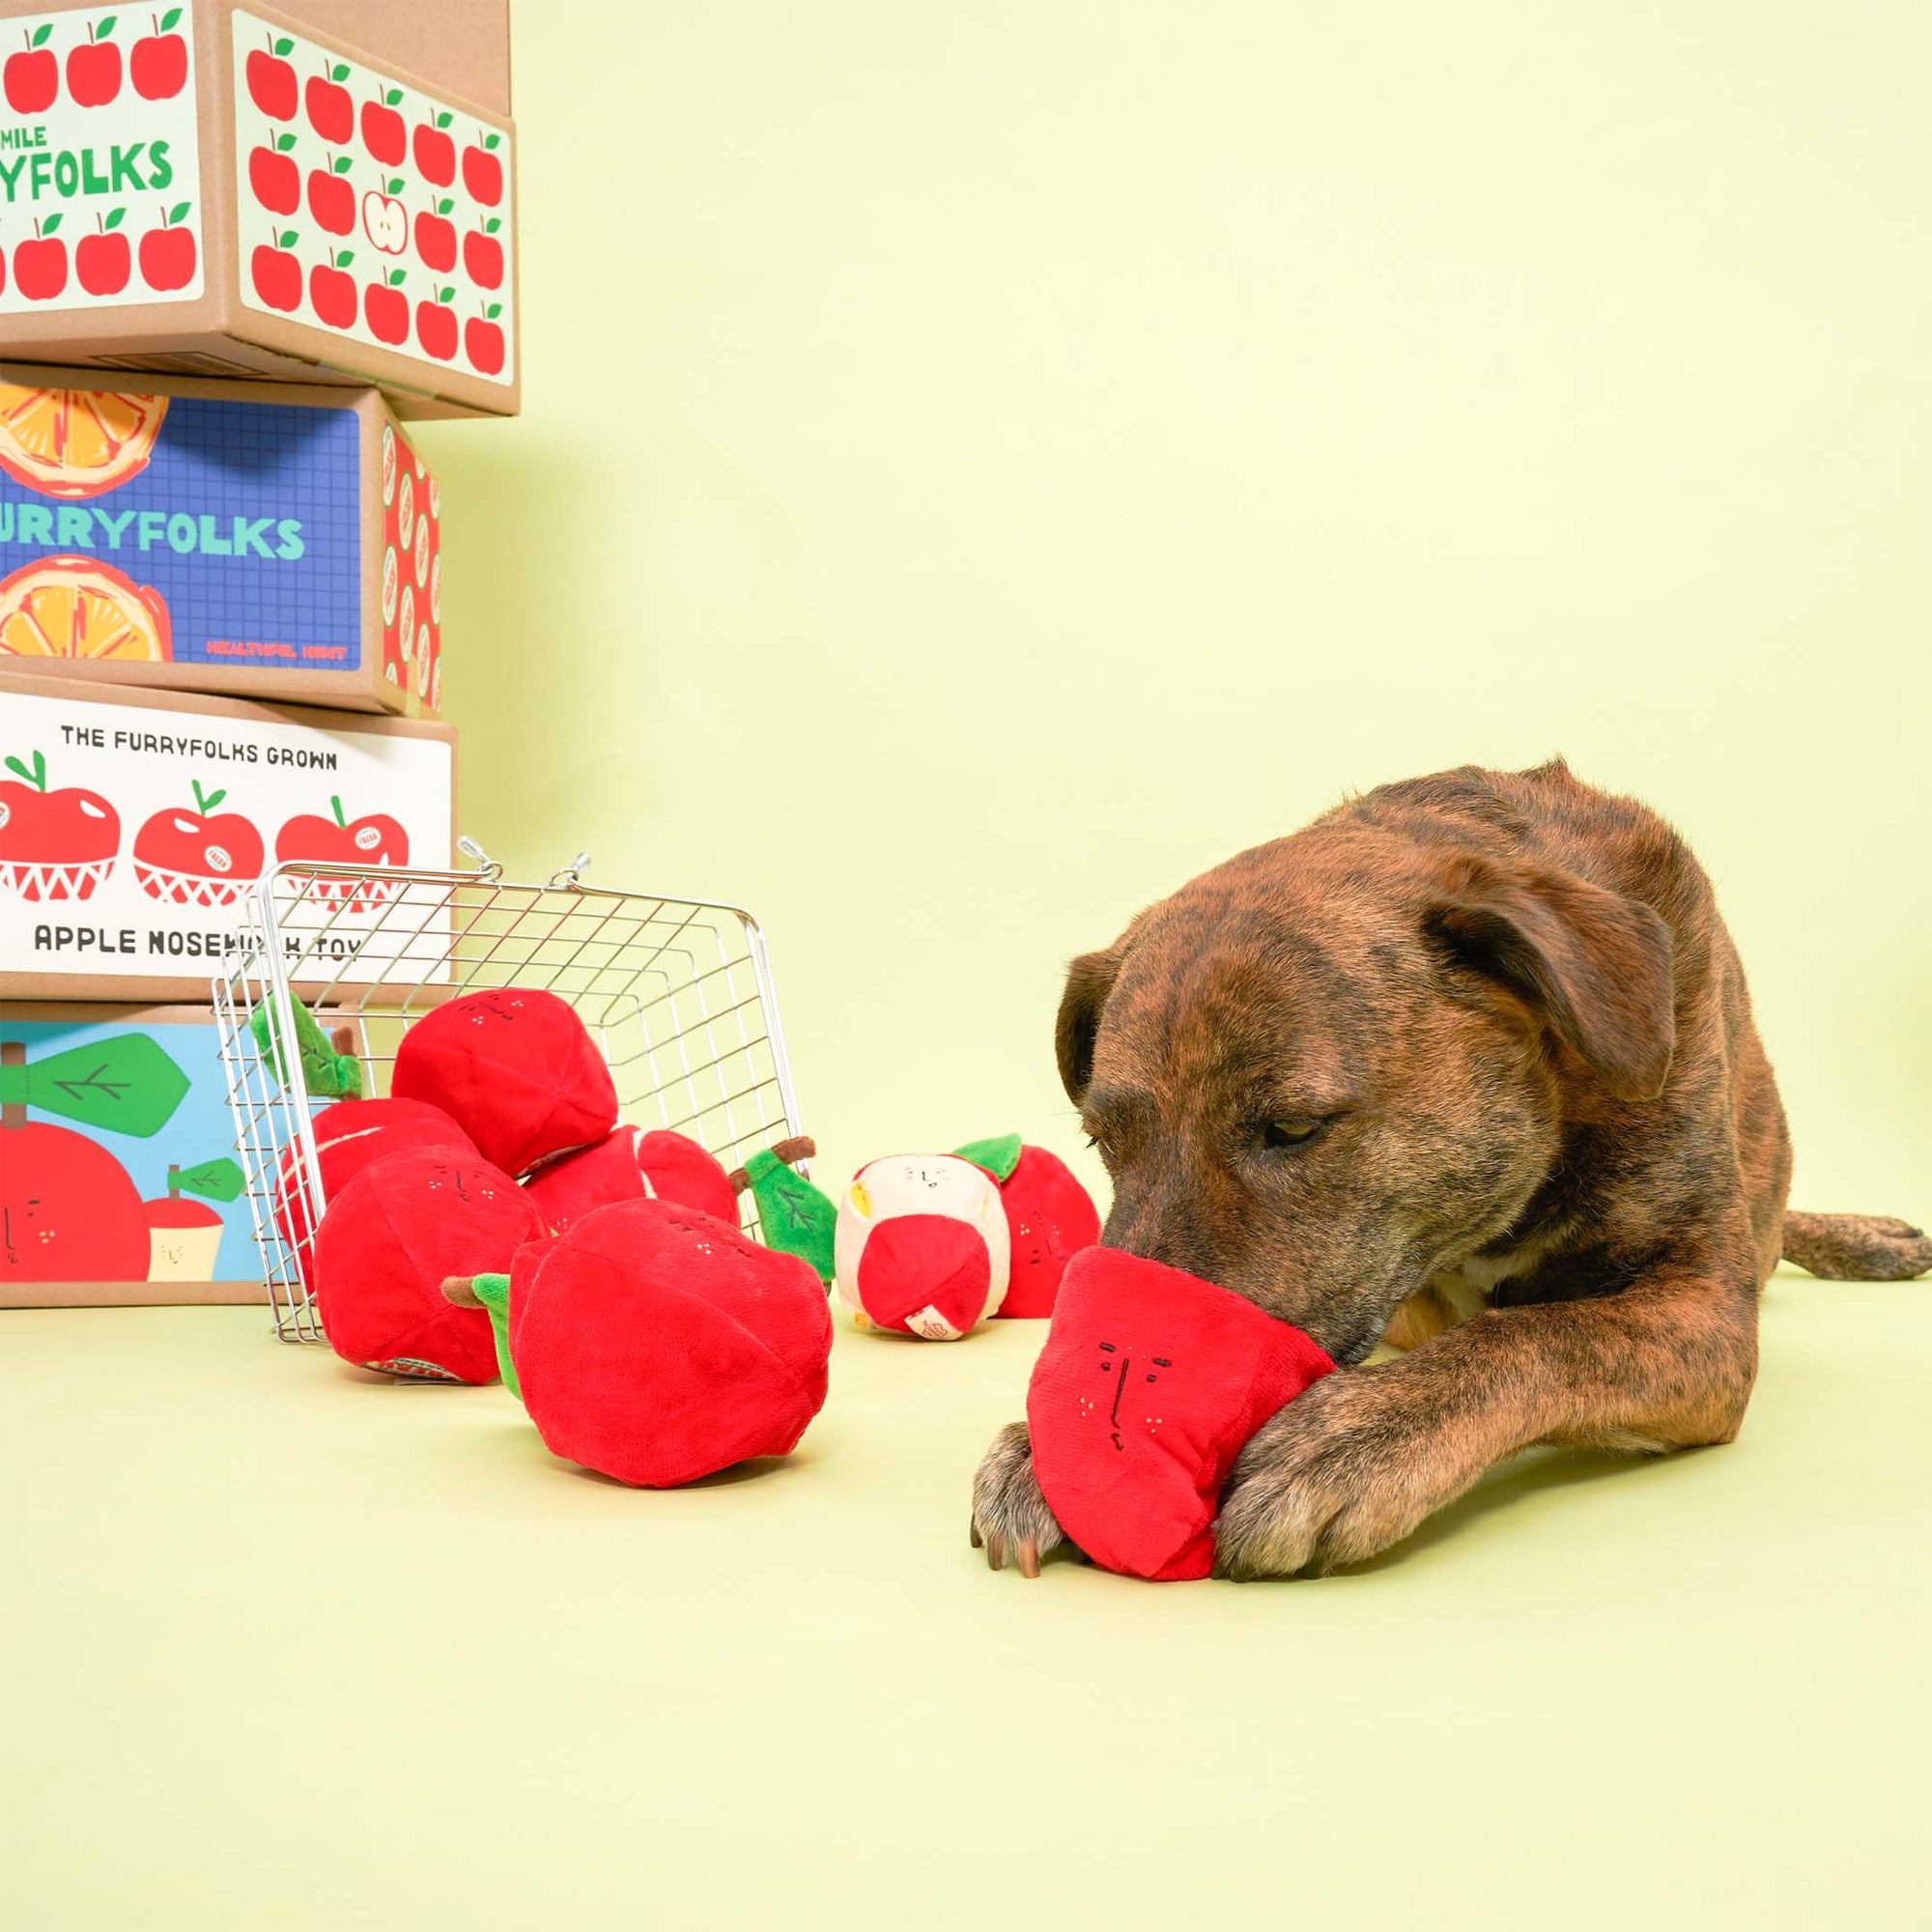 A brown dog lying down, chewing on a red apple-shaped dog toy, with more toys and a shopping cart nearby, and stacked boxes labeled "The Furryfolks Apple Nosework Toy" in the background.